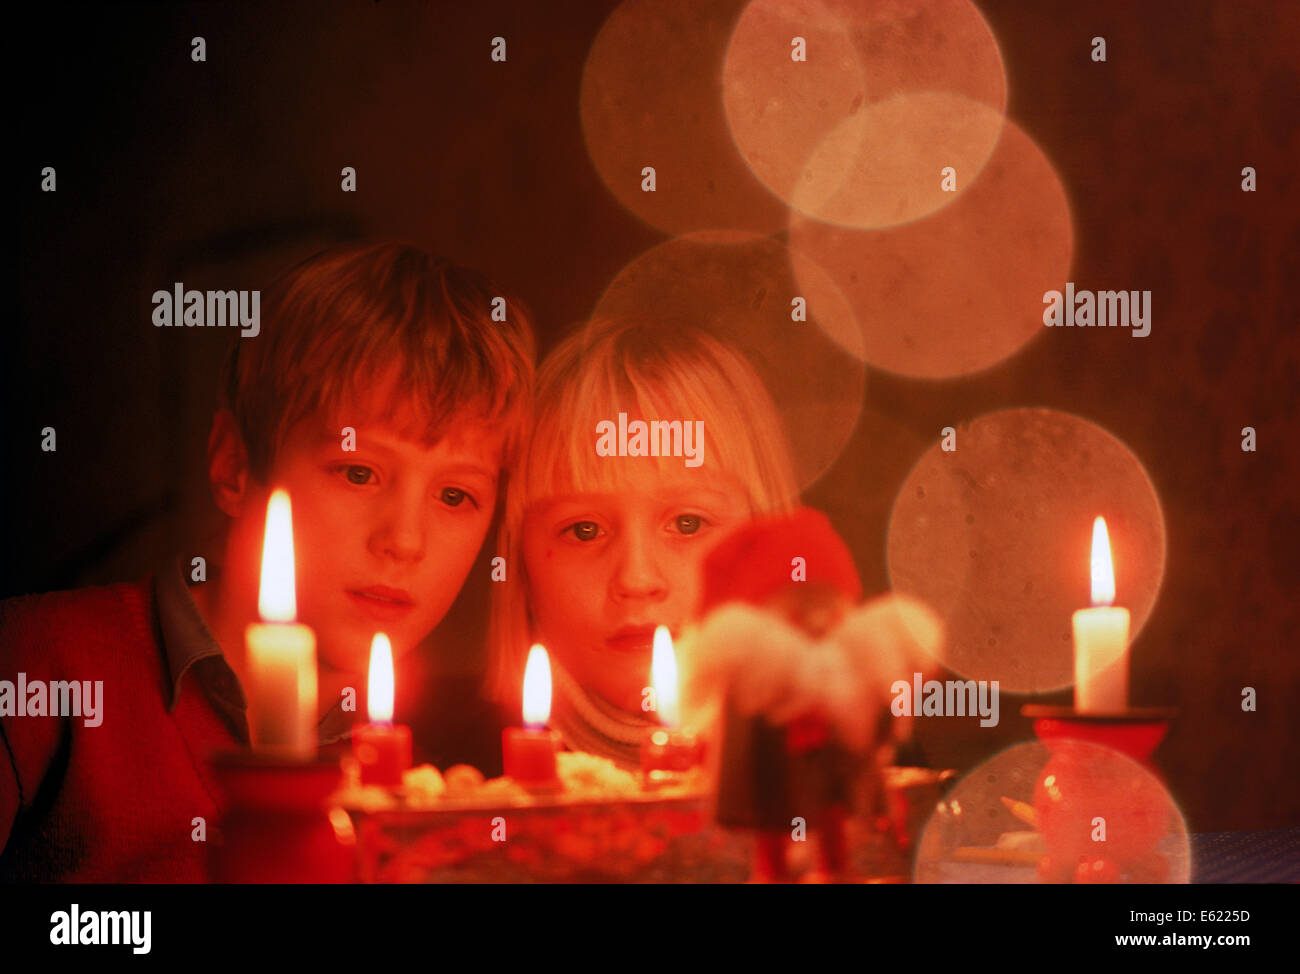 Brother and sister staring at Christmas candles Stock Photo